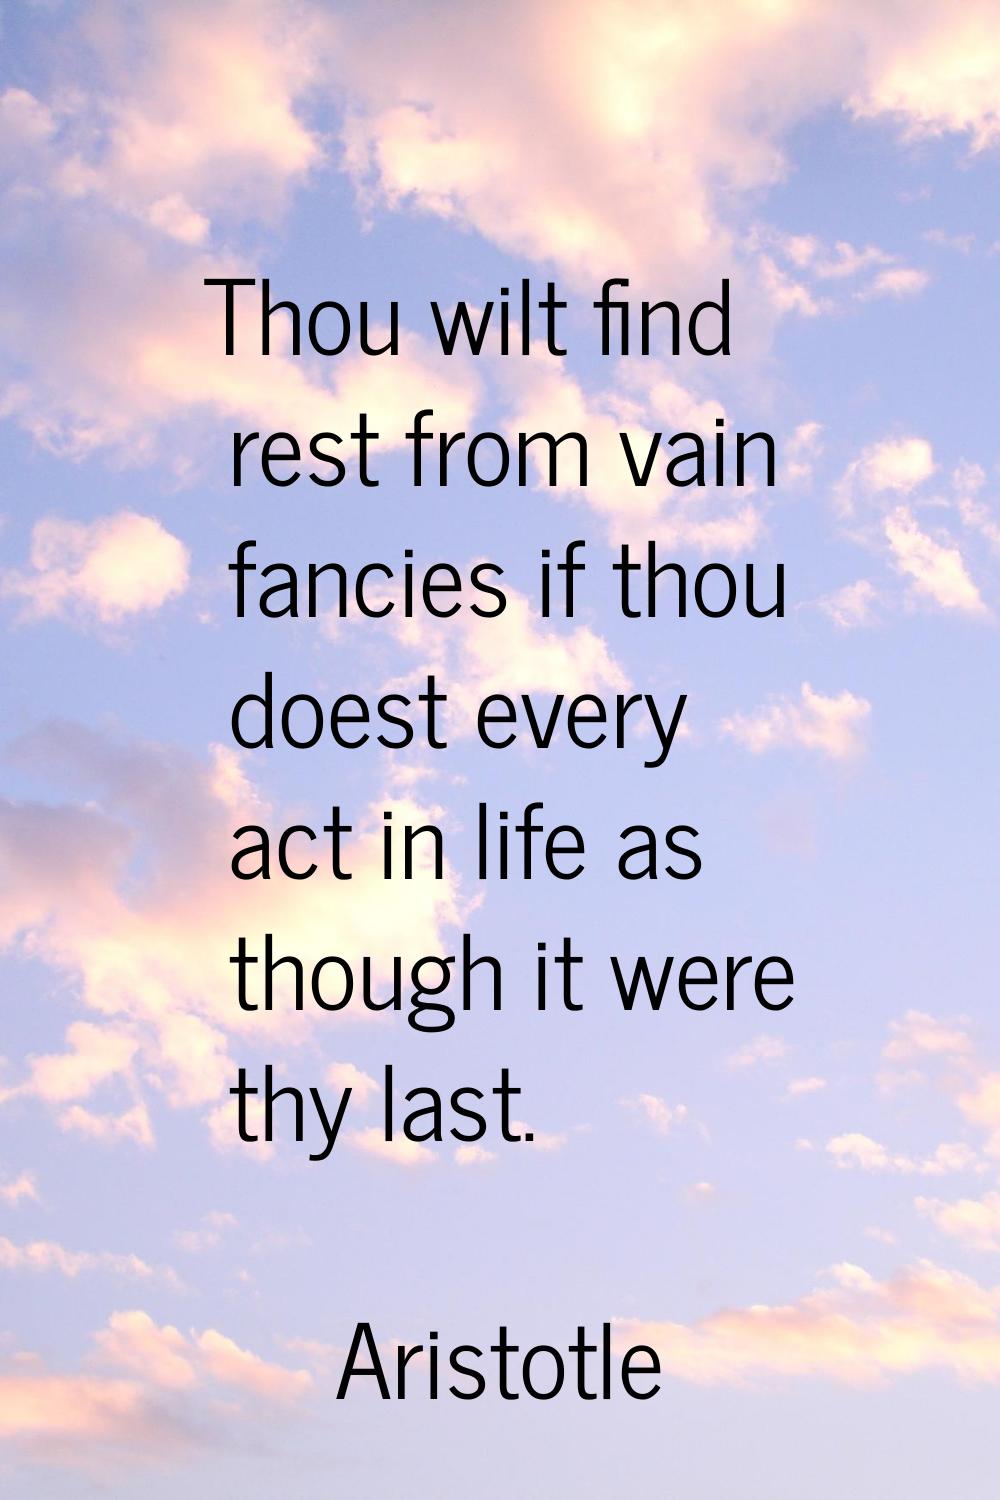 Thou wilt find rest from vain fancies if thou doest every act in life as though it were thy last.